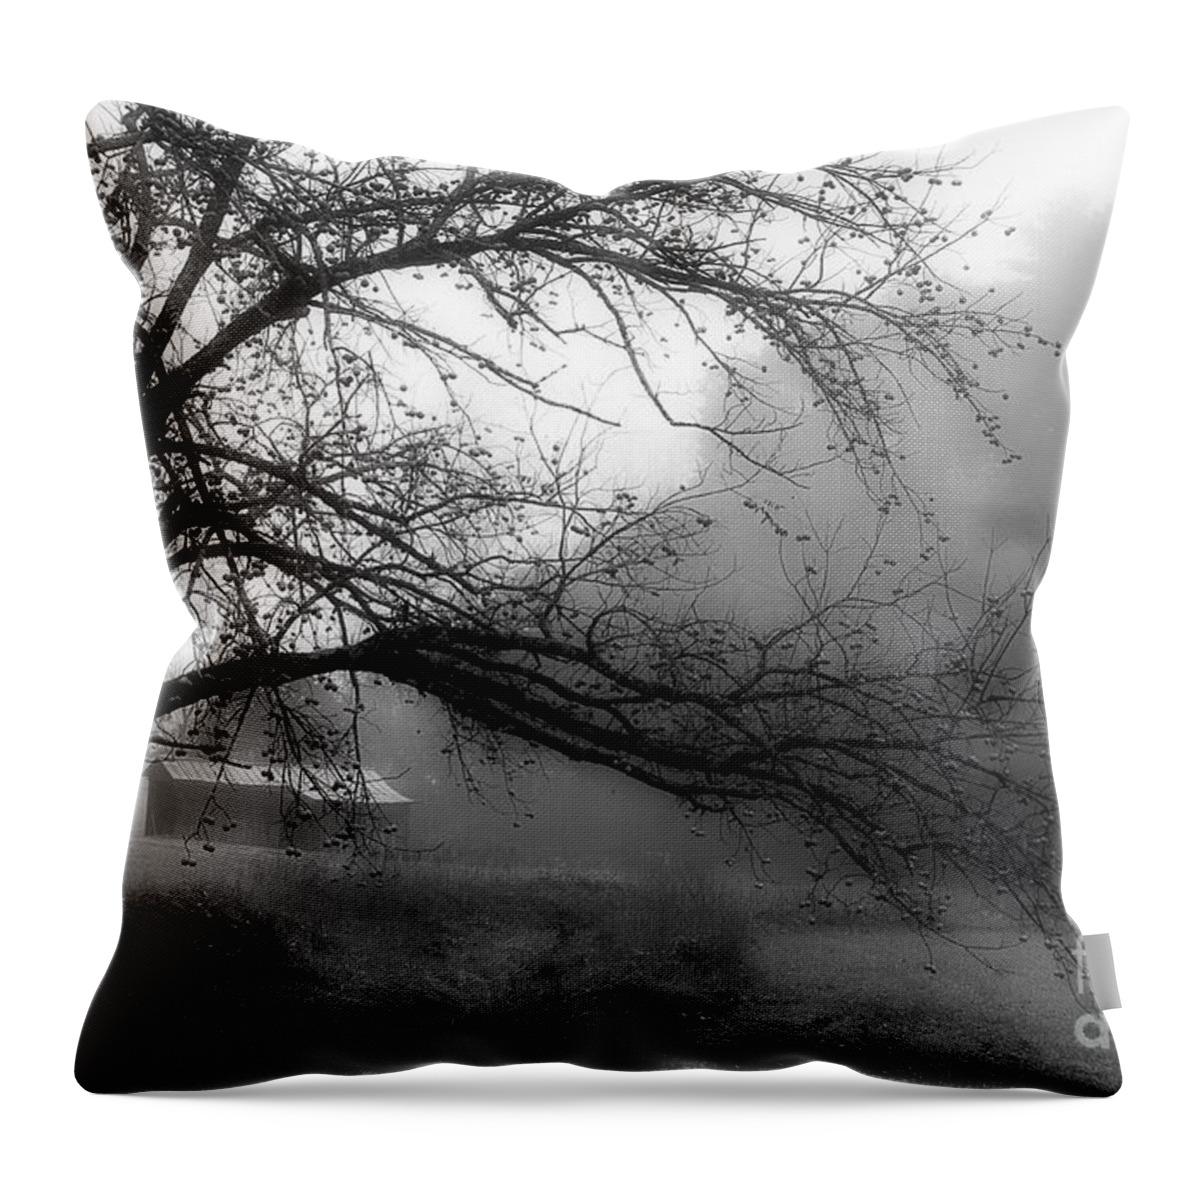 Walnut Tree Throw Pillow featuring the photograph Walnut Tree Along The Creek by Michael Eingle